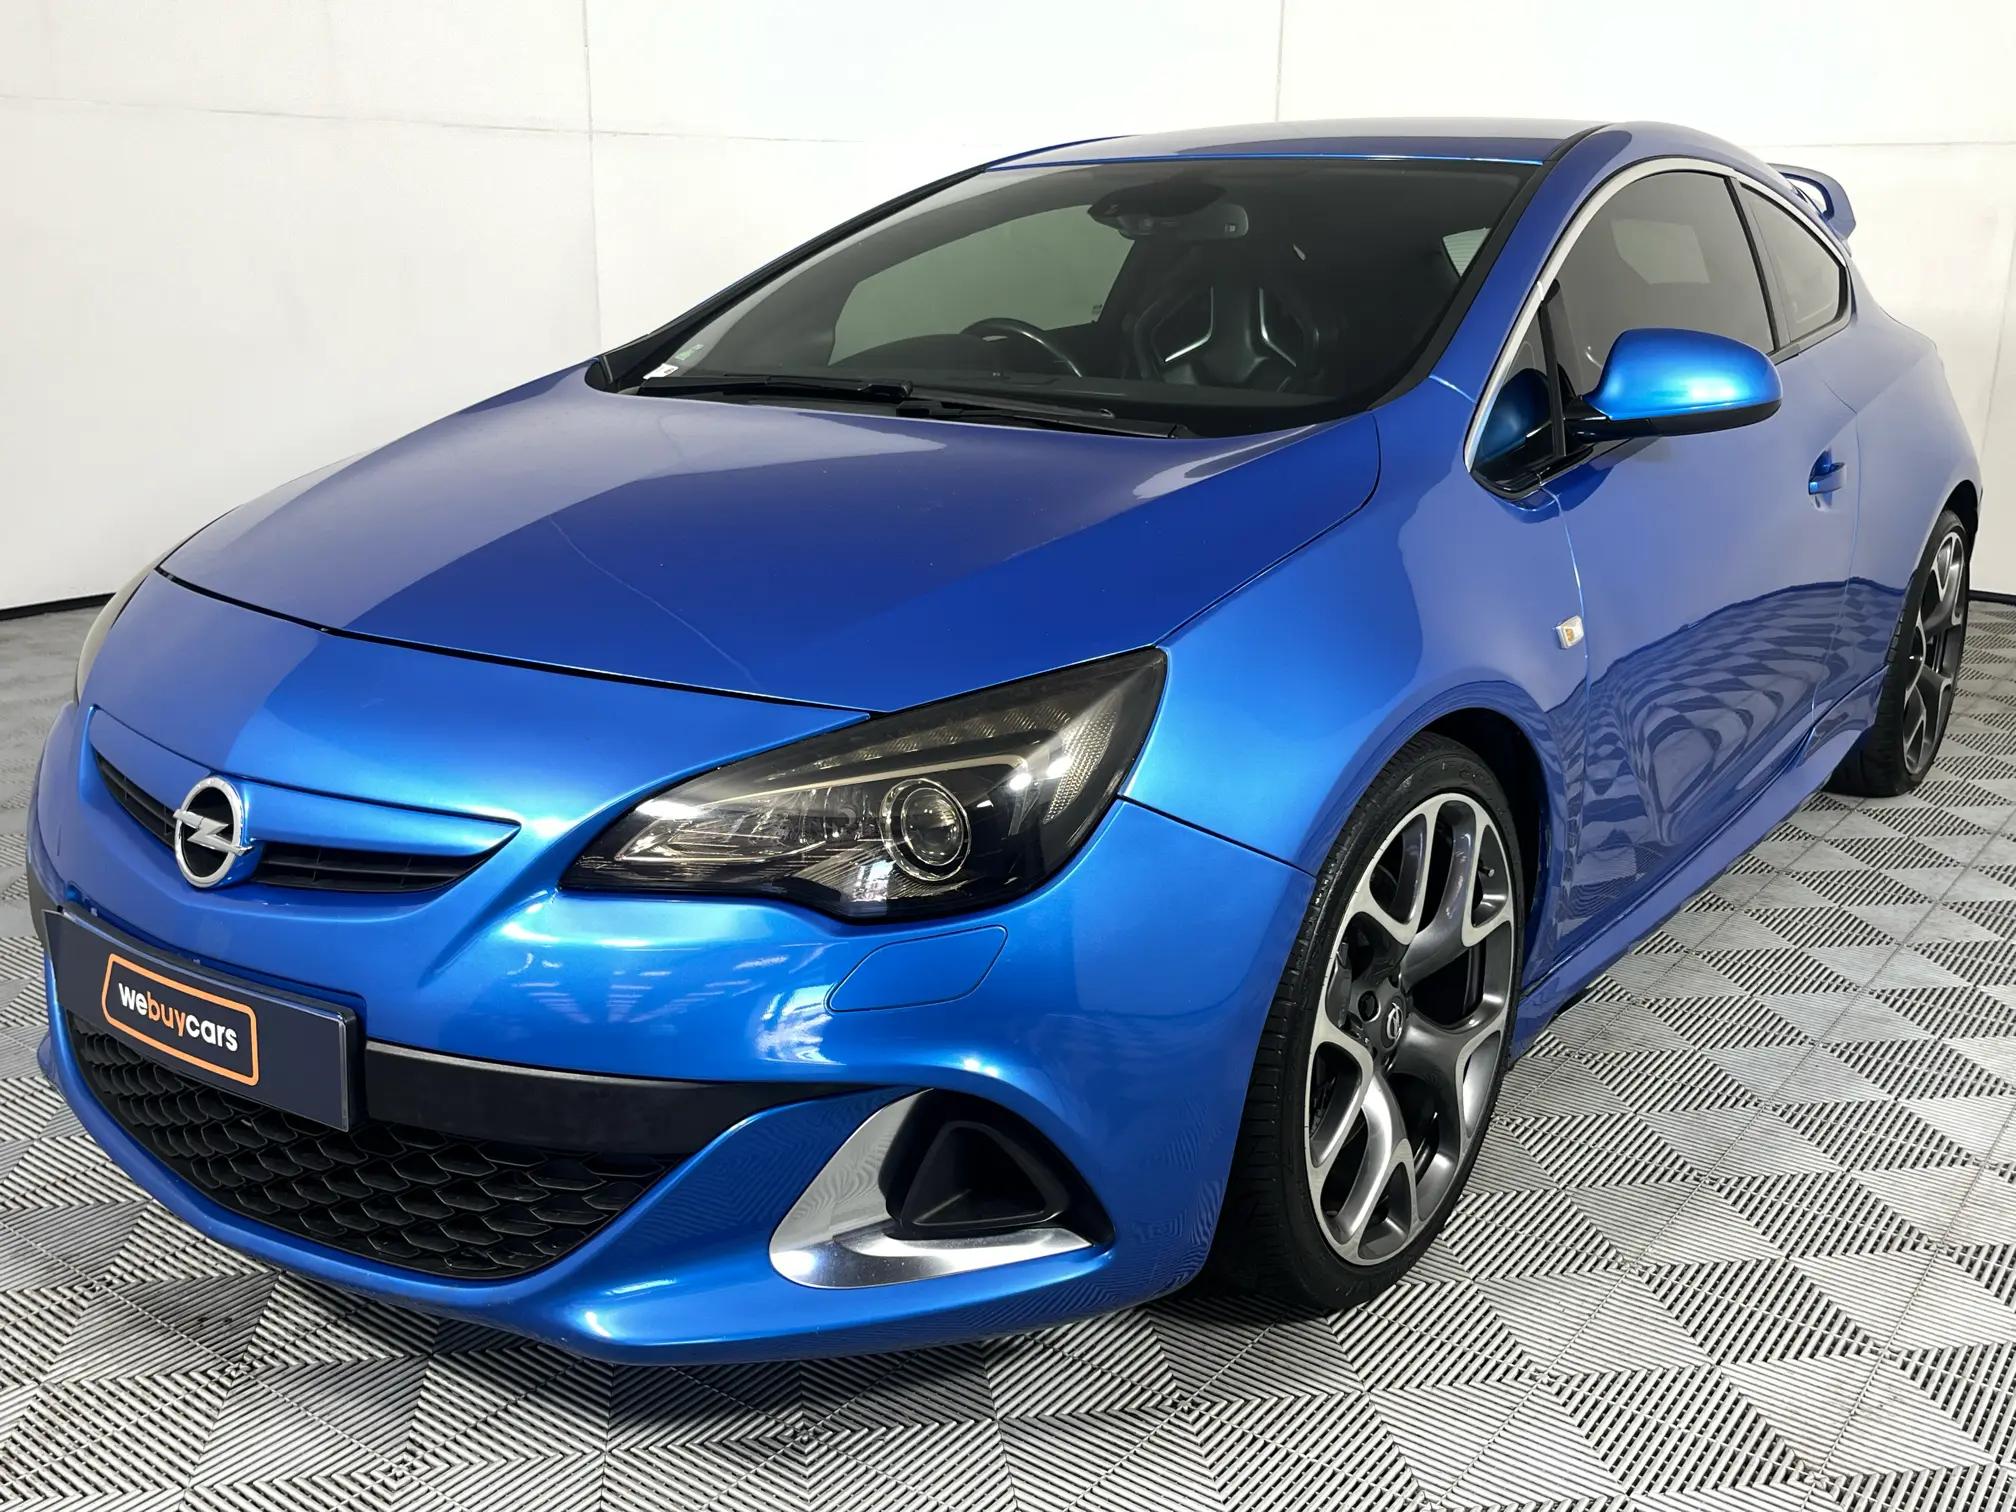 Opel Astra 2.0 T OPC (206 kW) 3 Door for sale - R 169 900 | Carfind.co.za